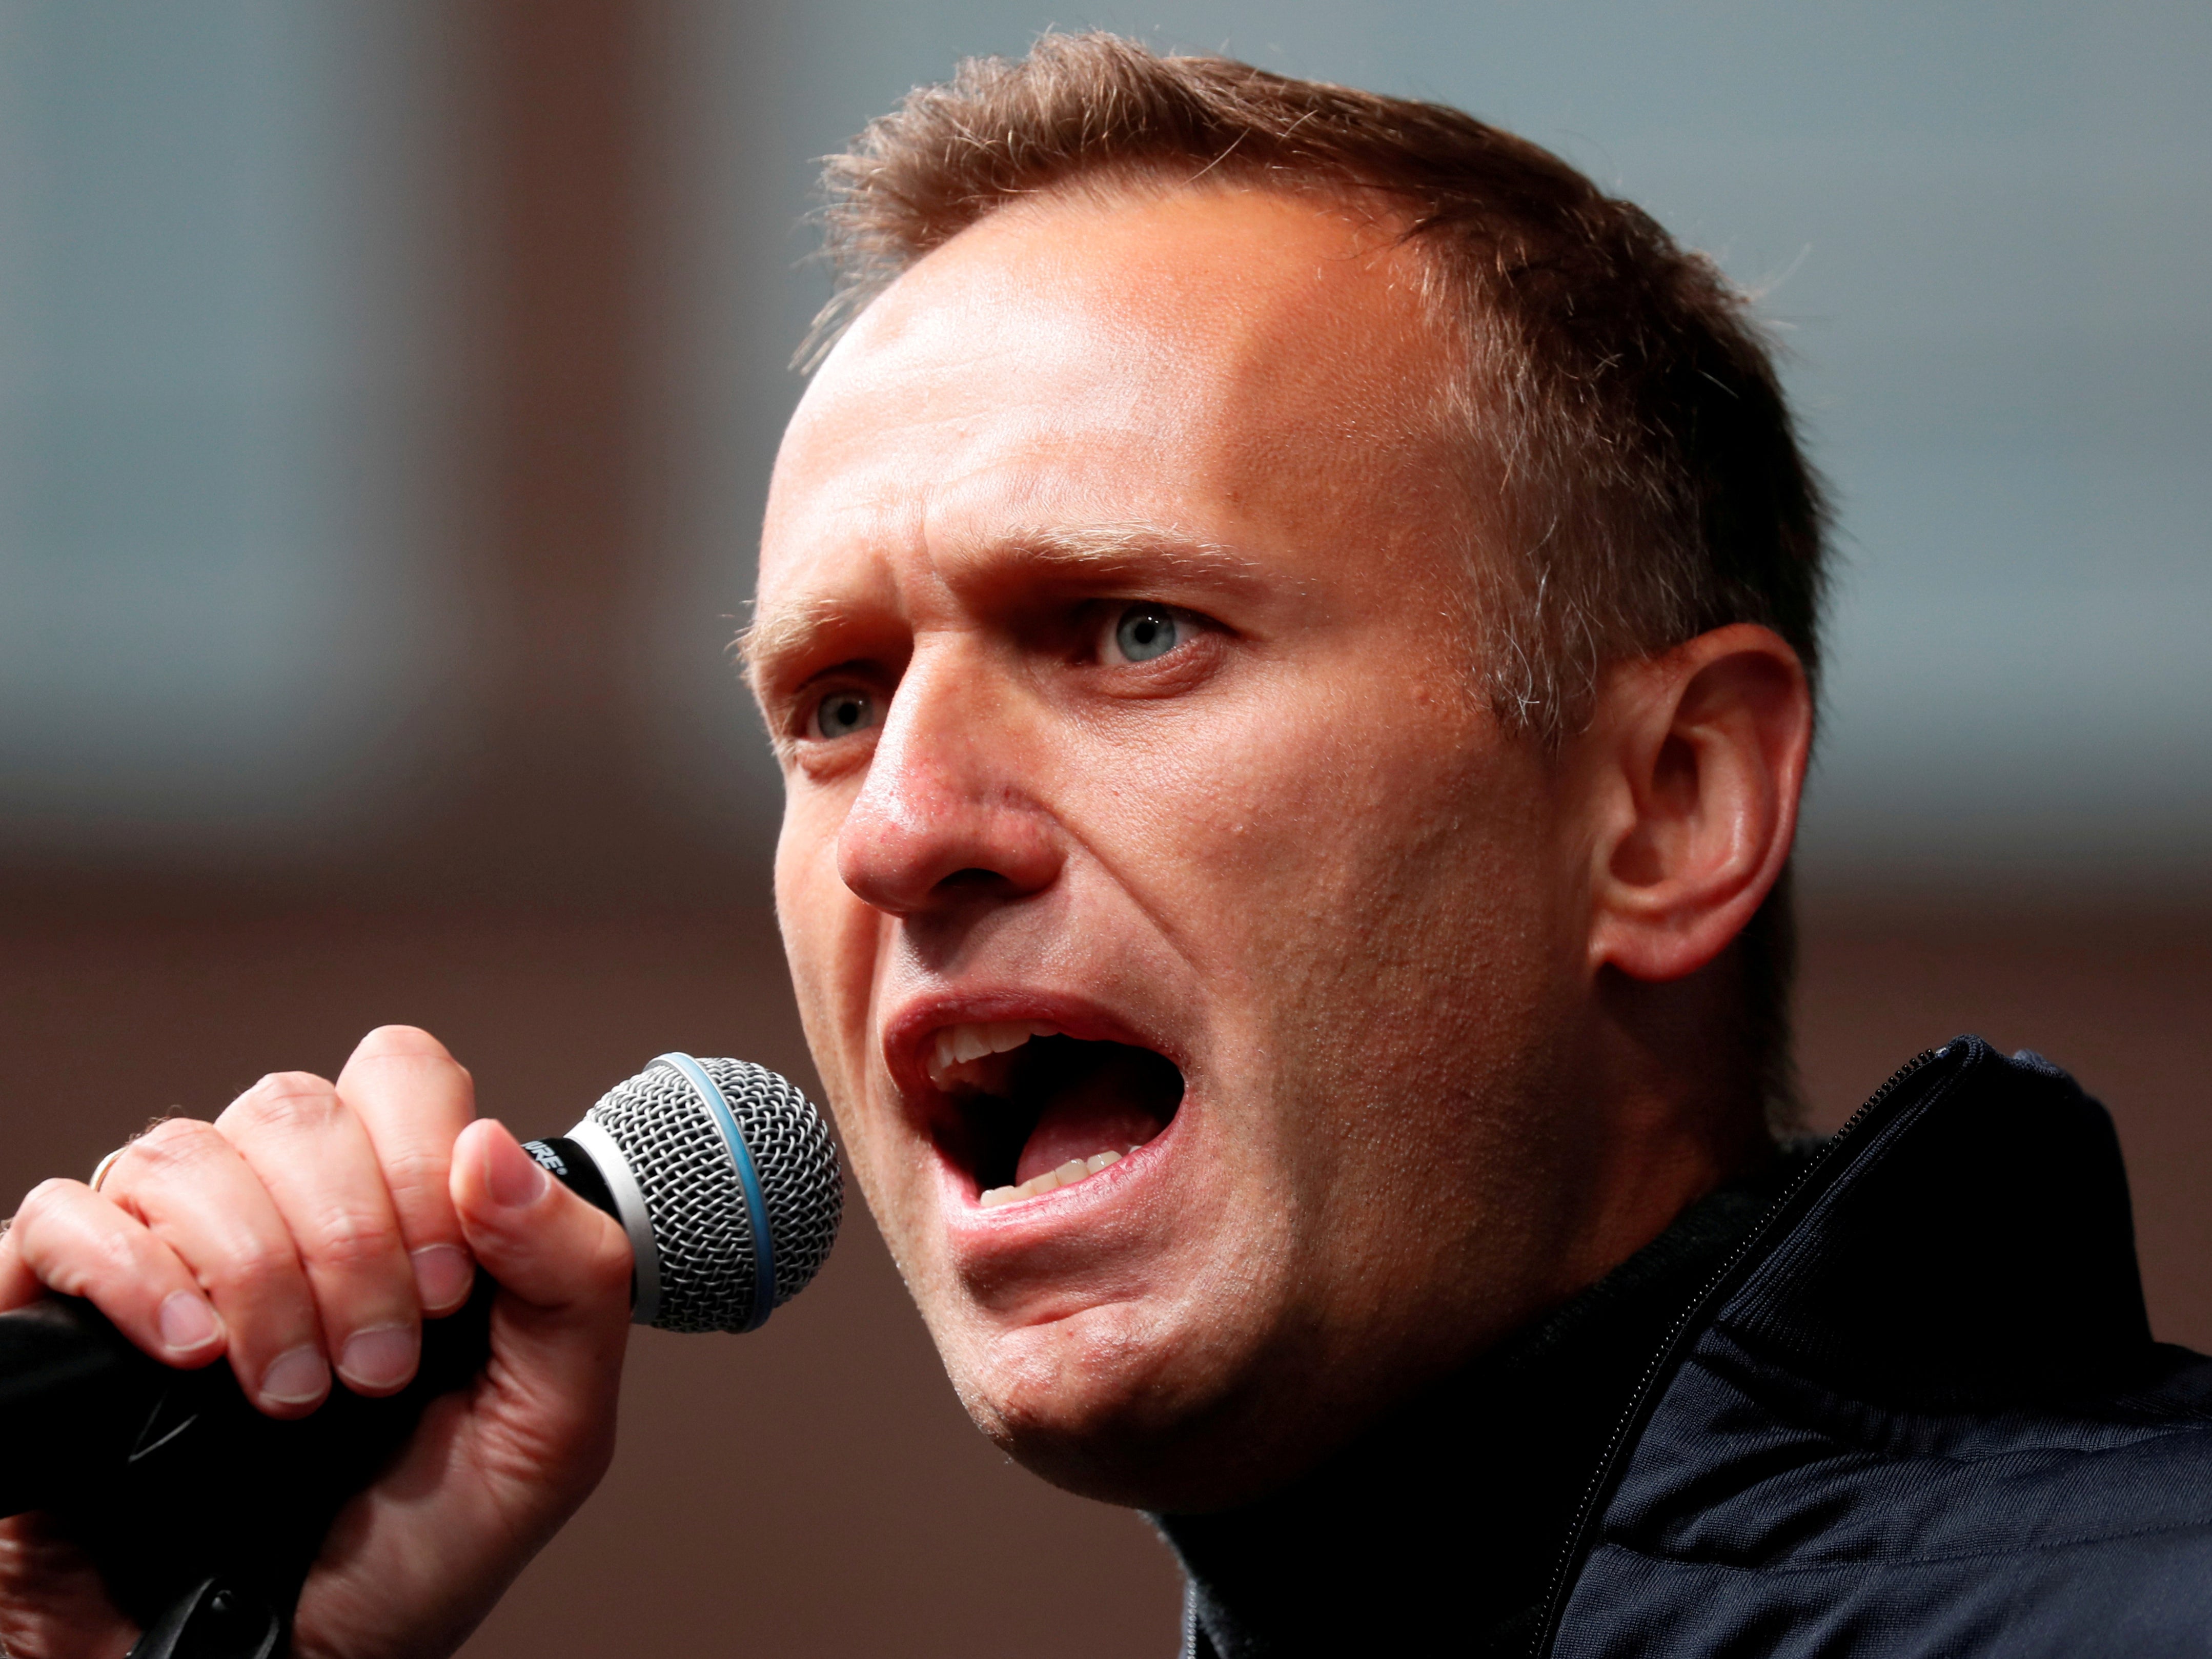 Alexei Navalny was arrested in January upon his return from Germany, where he had been recovering from a nerve-agent poisoning